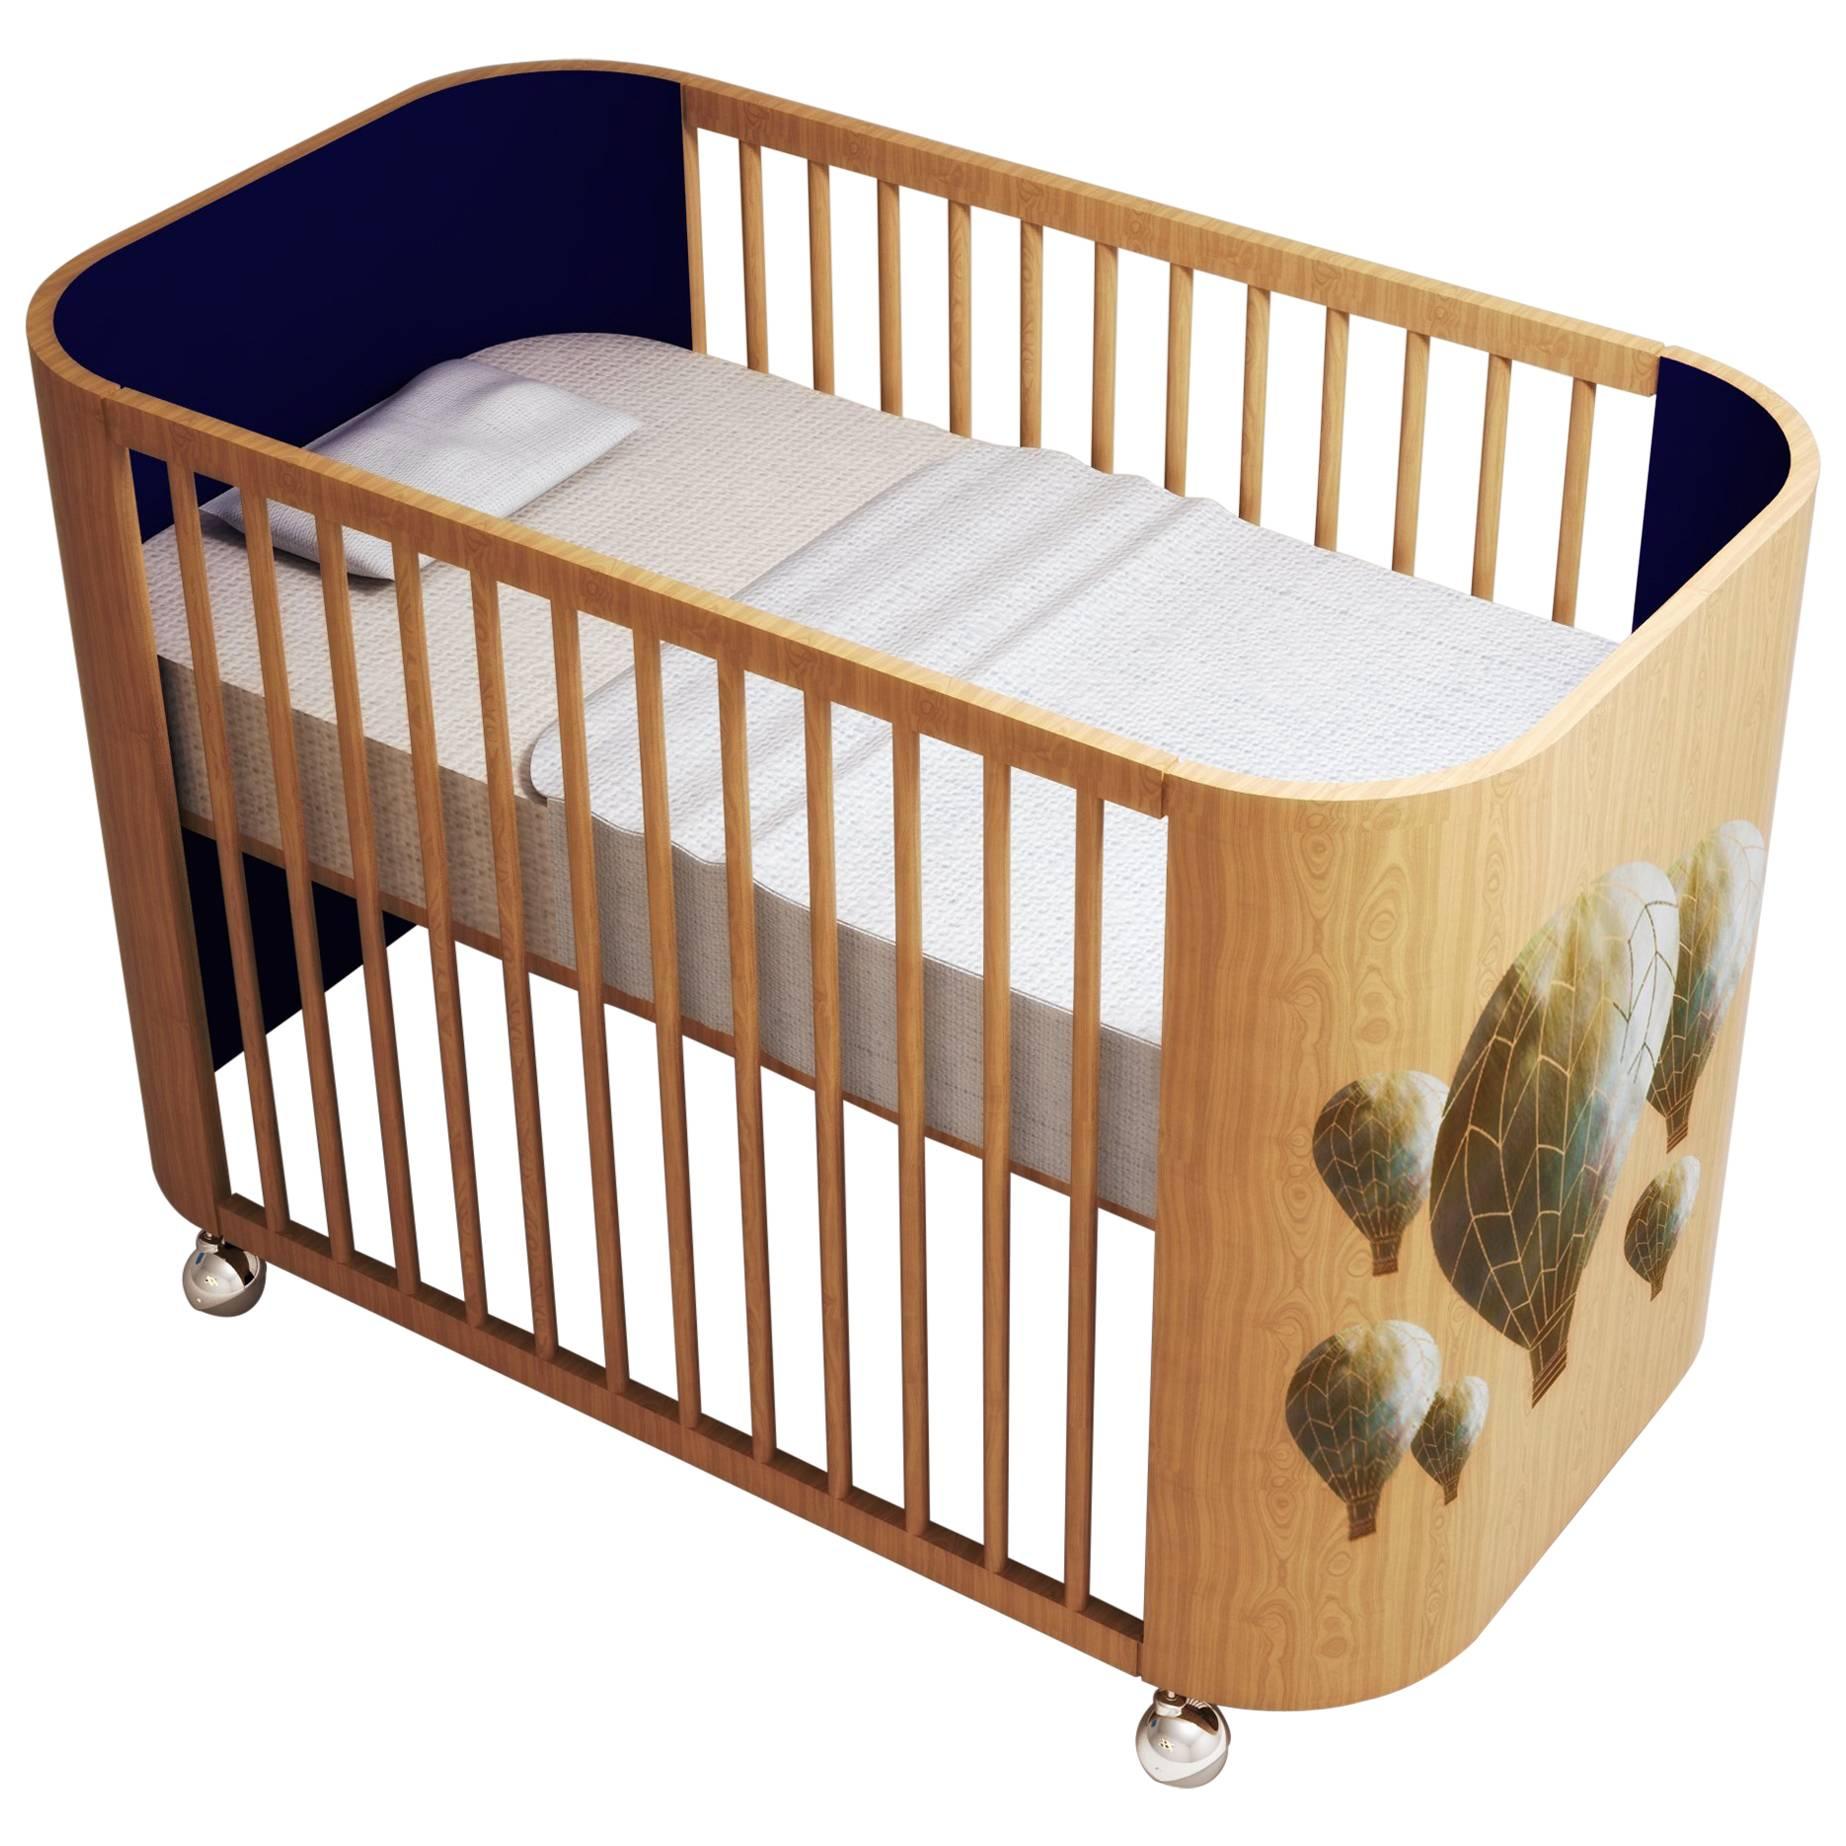 Embrace Adventure Crib in Beech Wood and Navy Blue by MISK Nursery For Sale